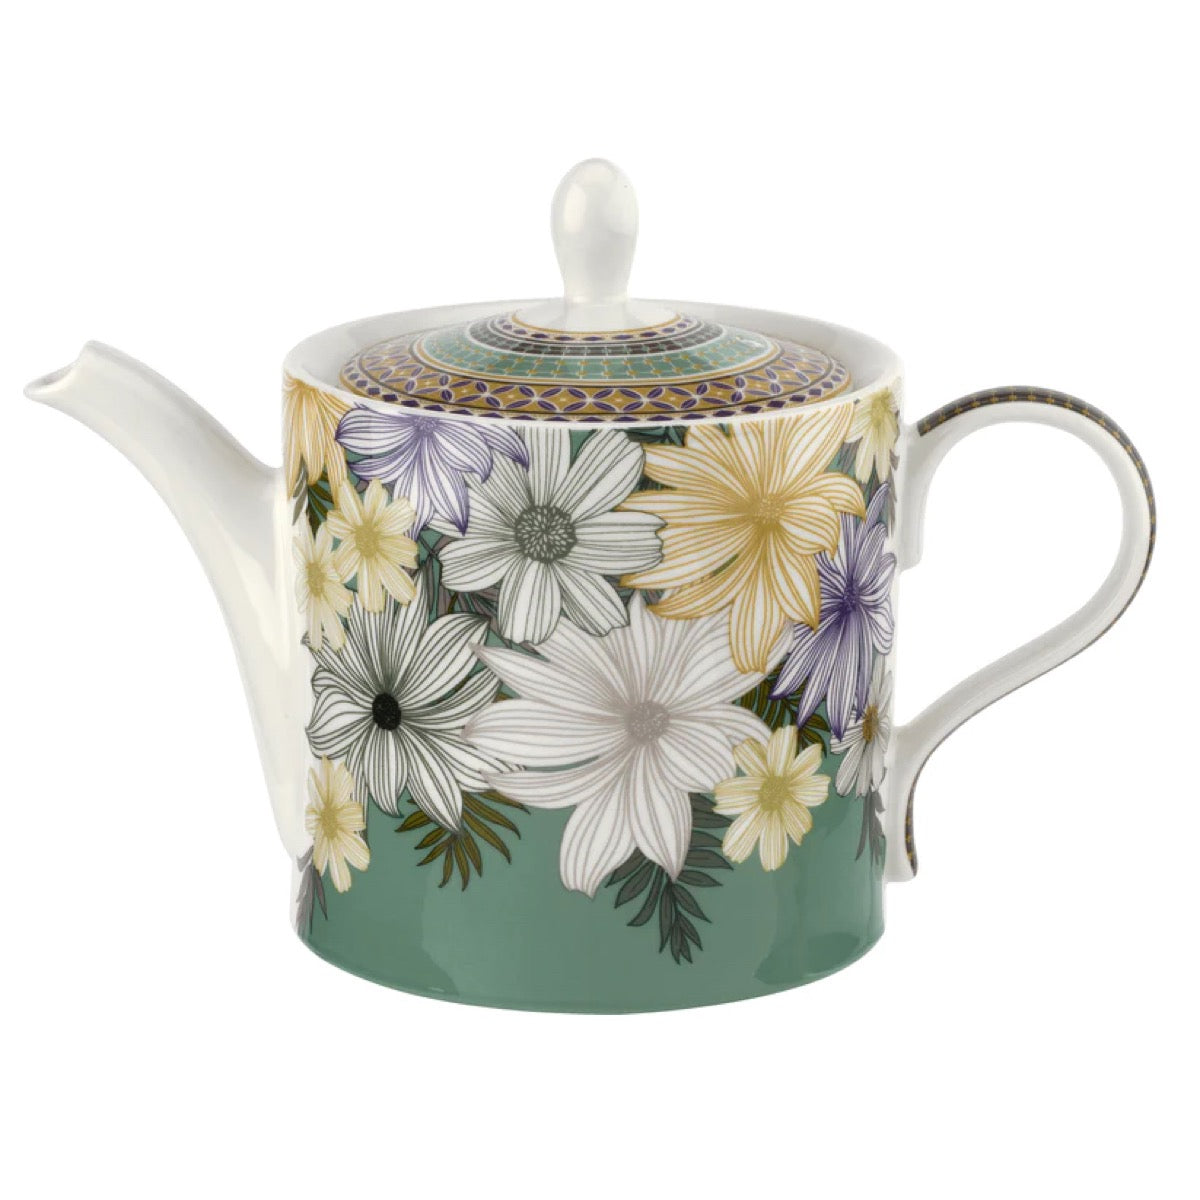 Portmeirion teapots for sale online with delivery 